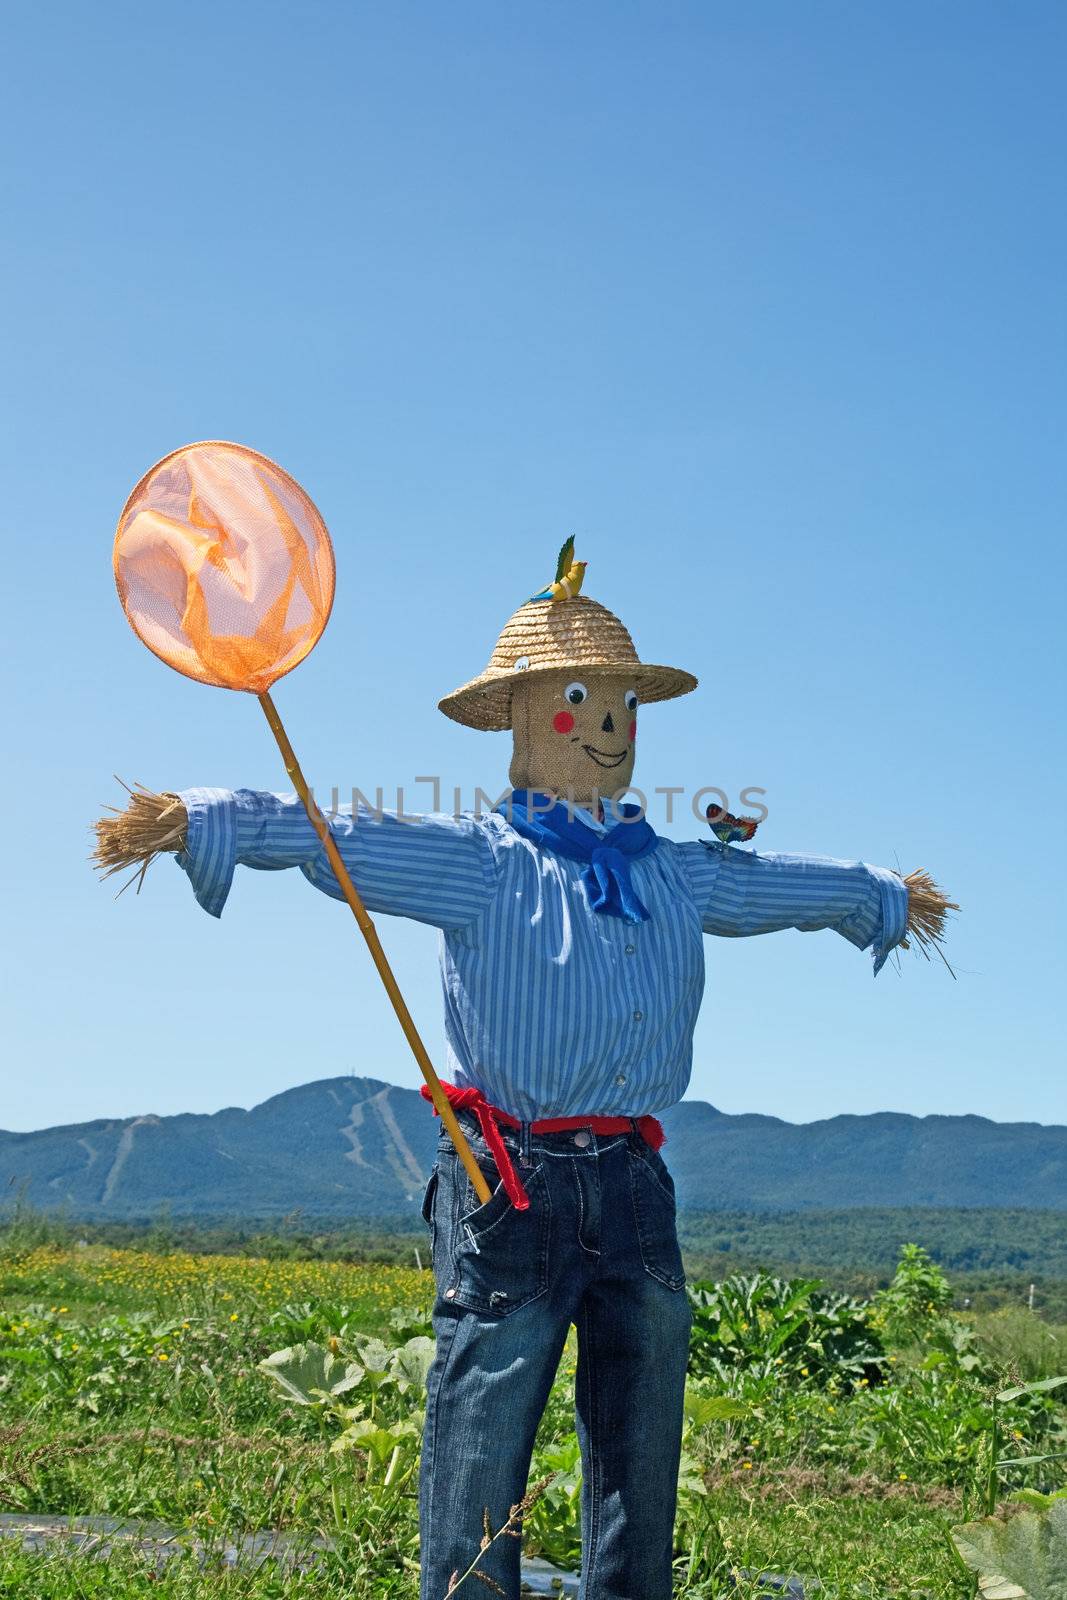 Rural scene - scarecrow with butterfly net in the field.